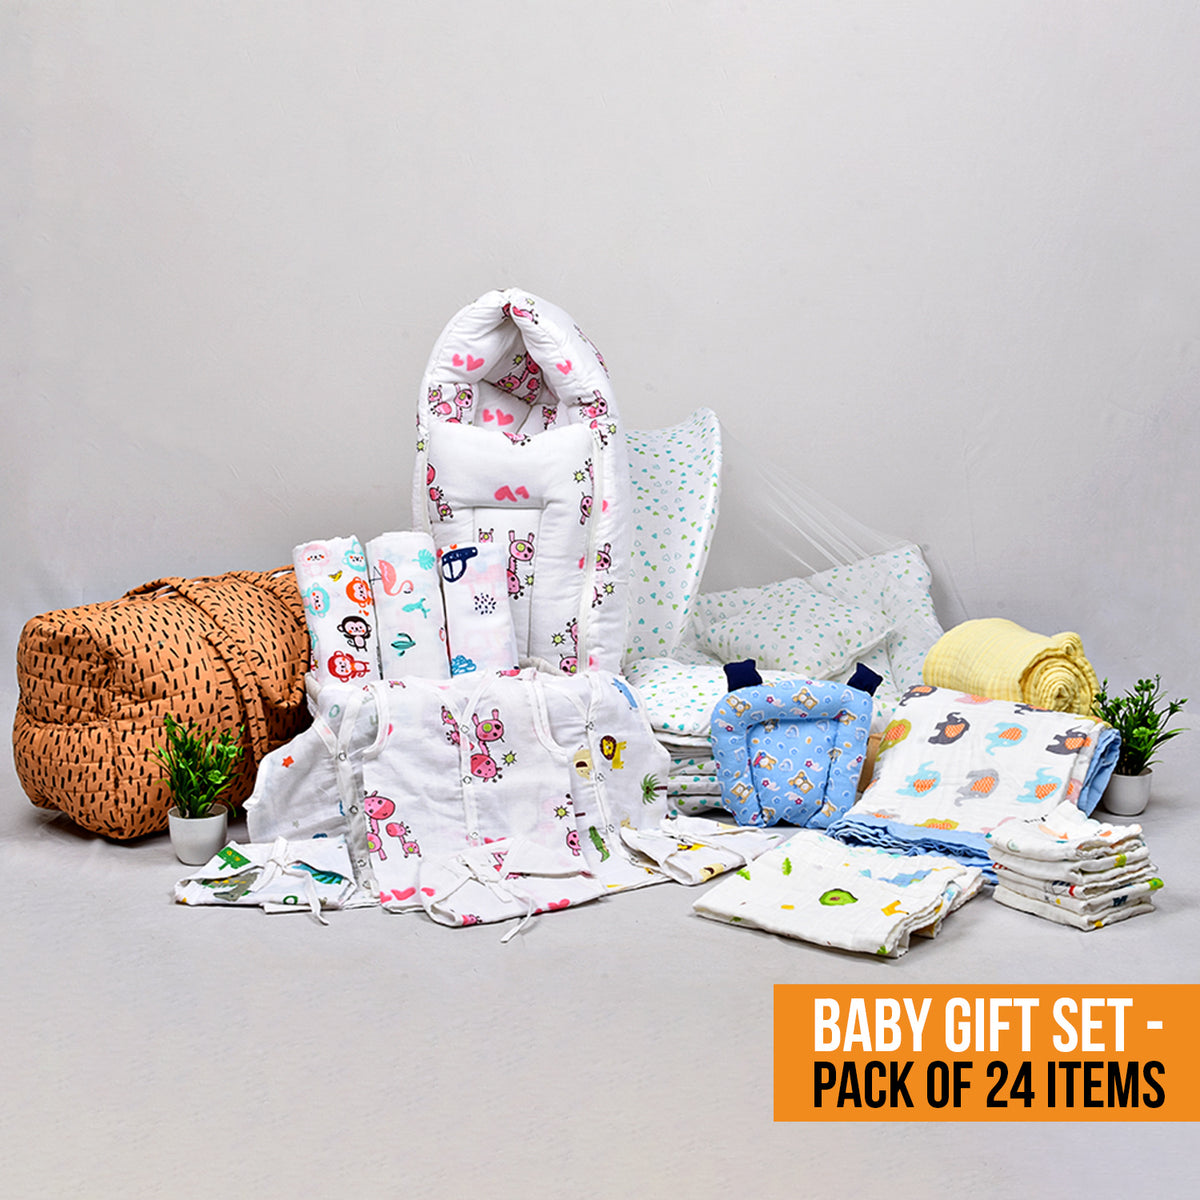 All Muslin New Born Complete Gift set ( 24 items )